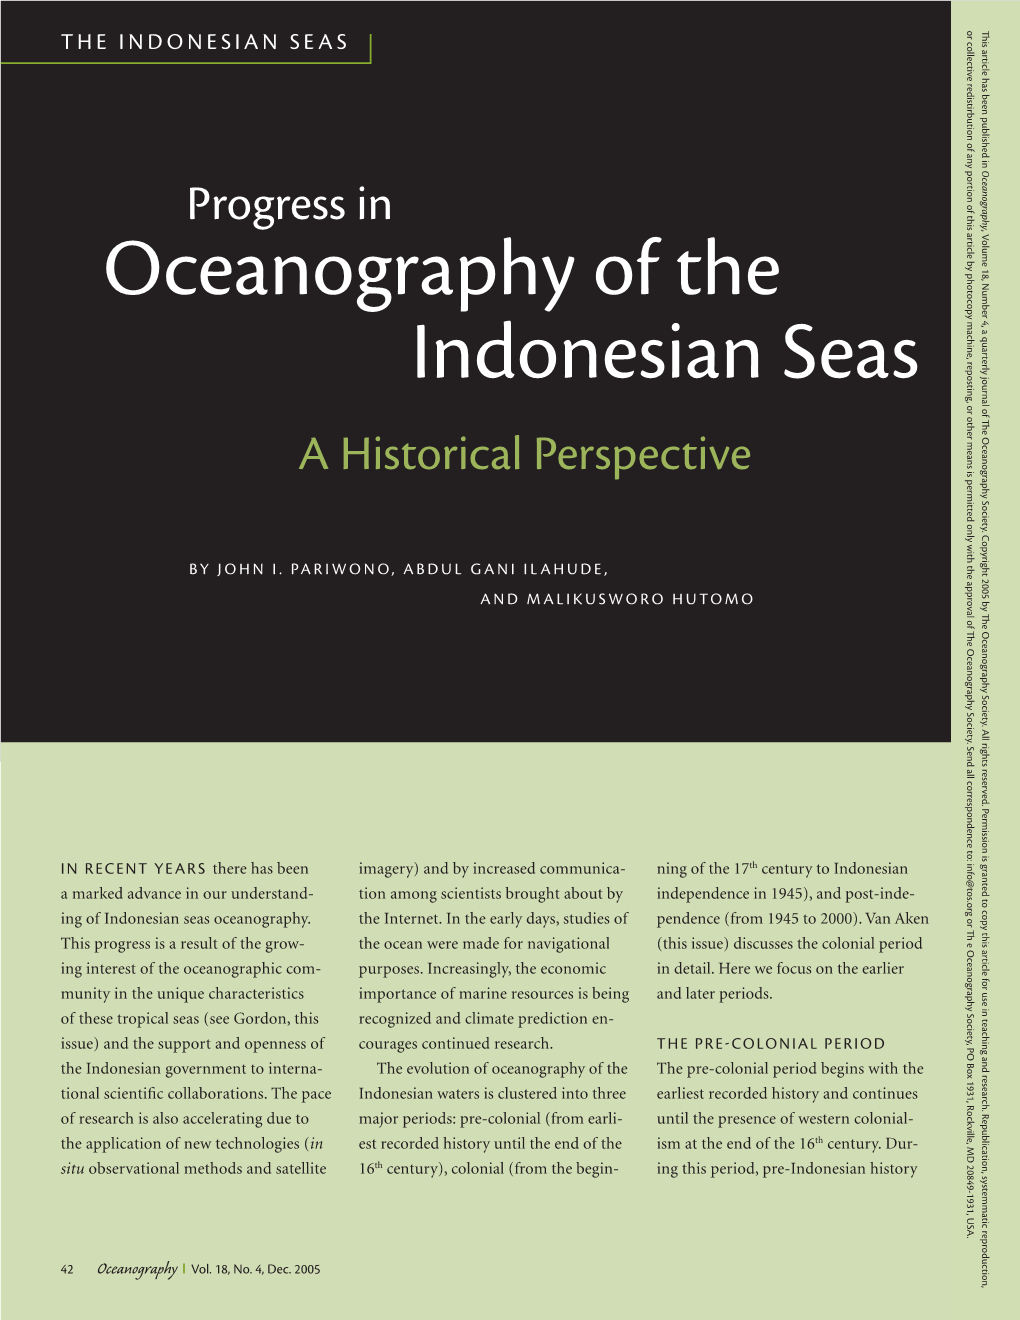 Oceanography of the Indonesian Seas